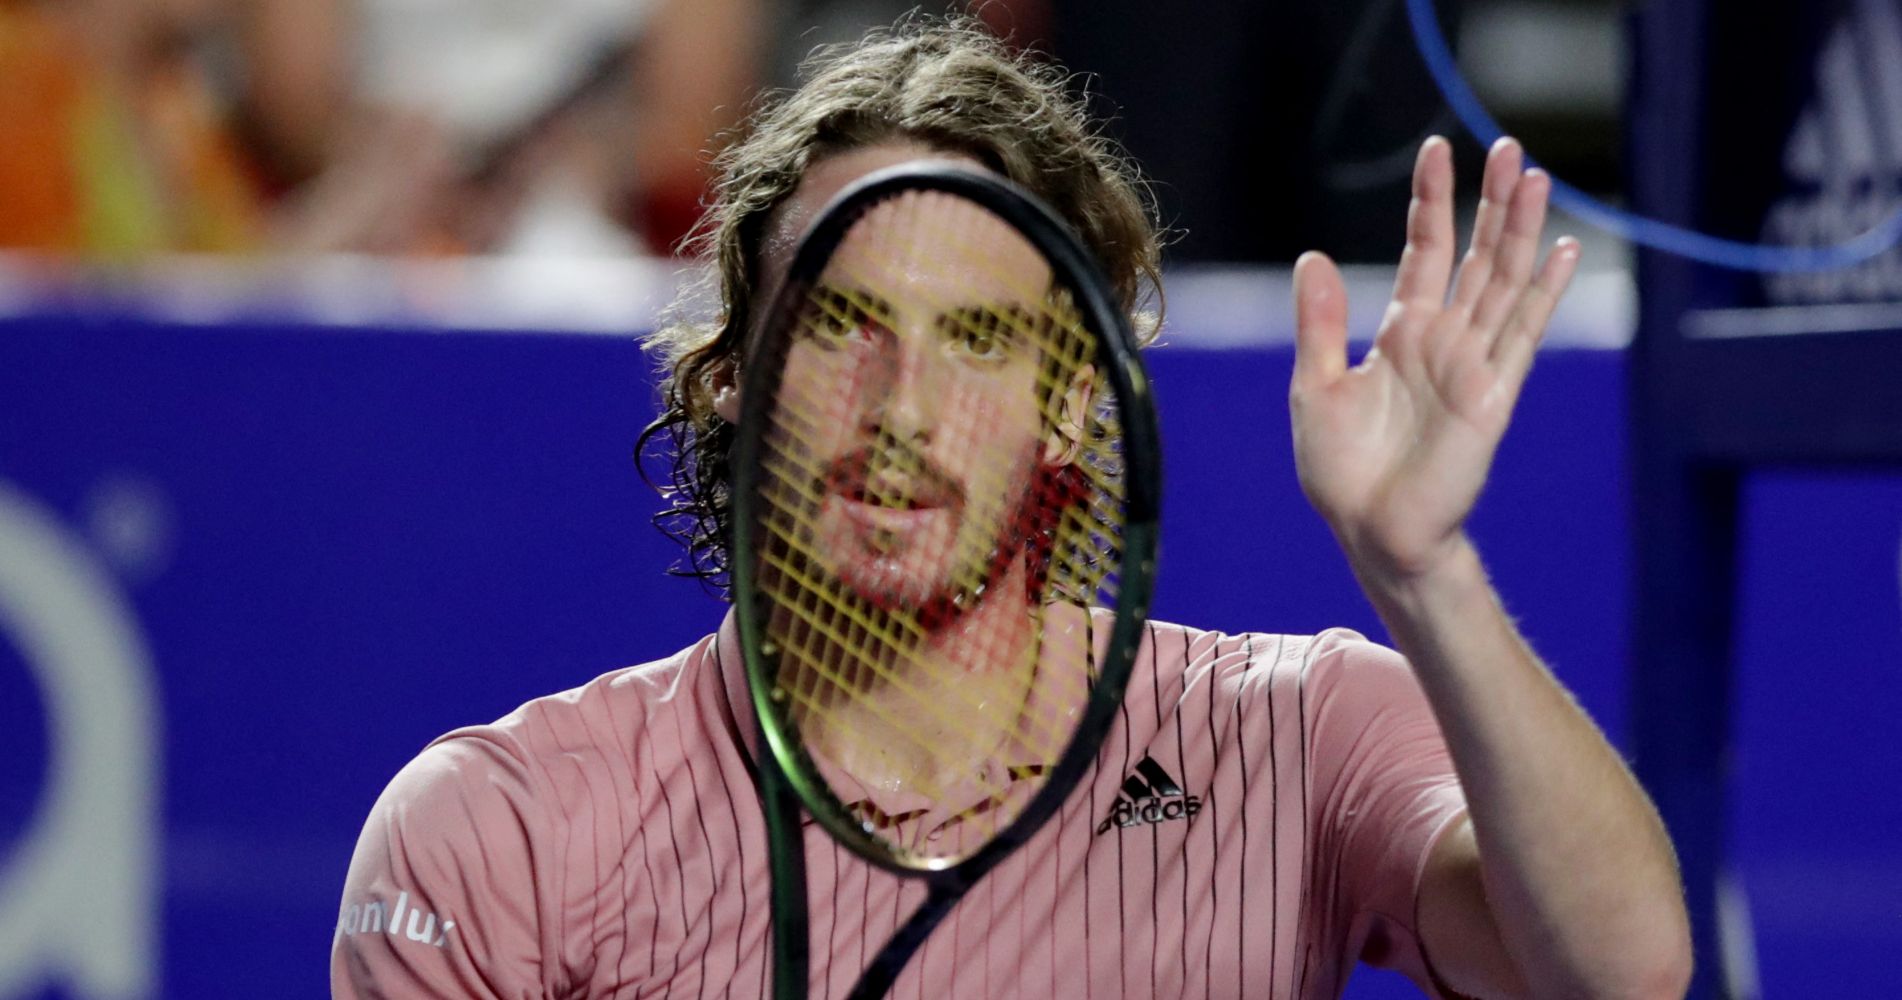 Greece's Stefanos Tsitsipas celebrates winning his round of 16 match against J.J. Wolf of the U.S. in Acapulco